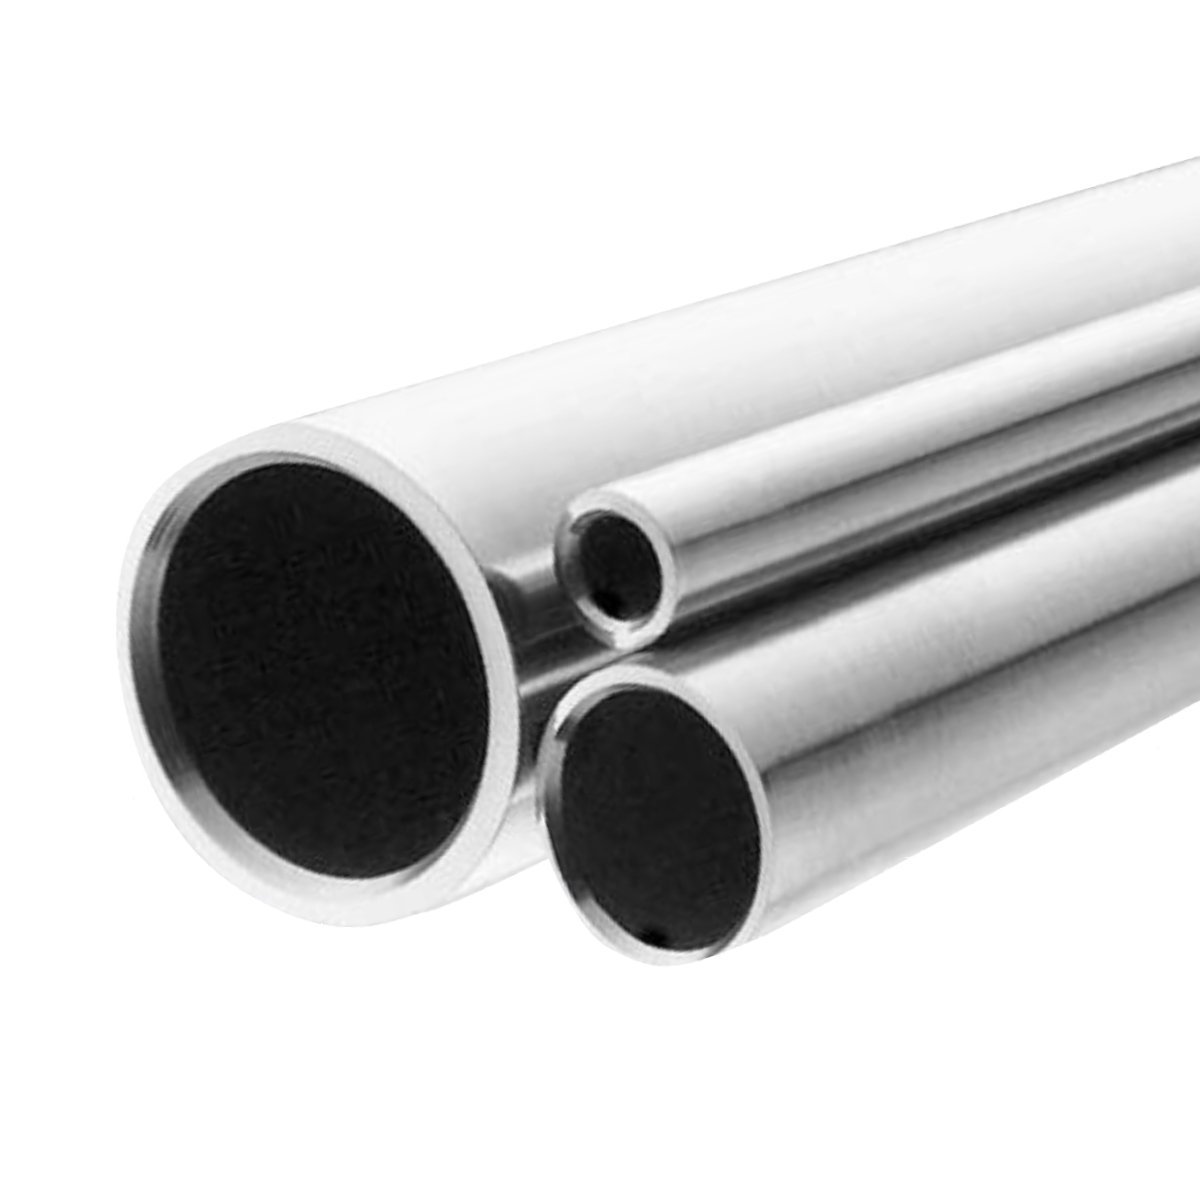 APPROVED VENDOR PIPE,1/8 IN,316 SS,36 IN L,SCHEDULE - Metal Pipe